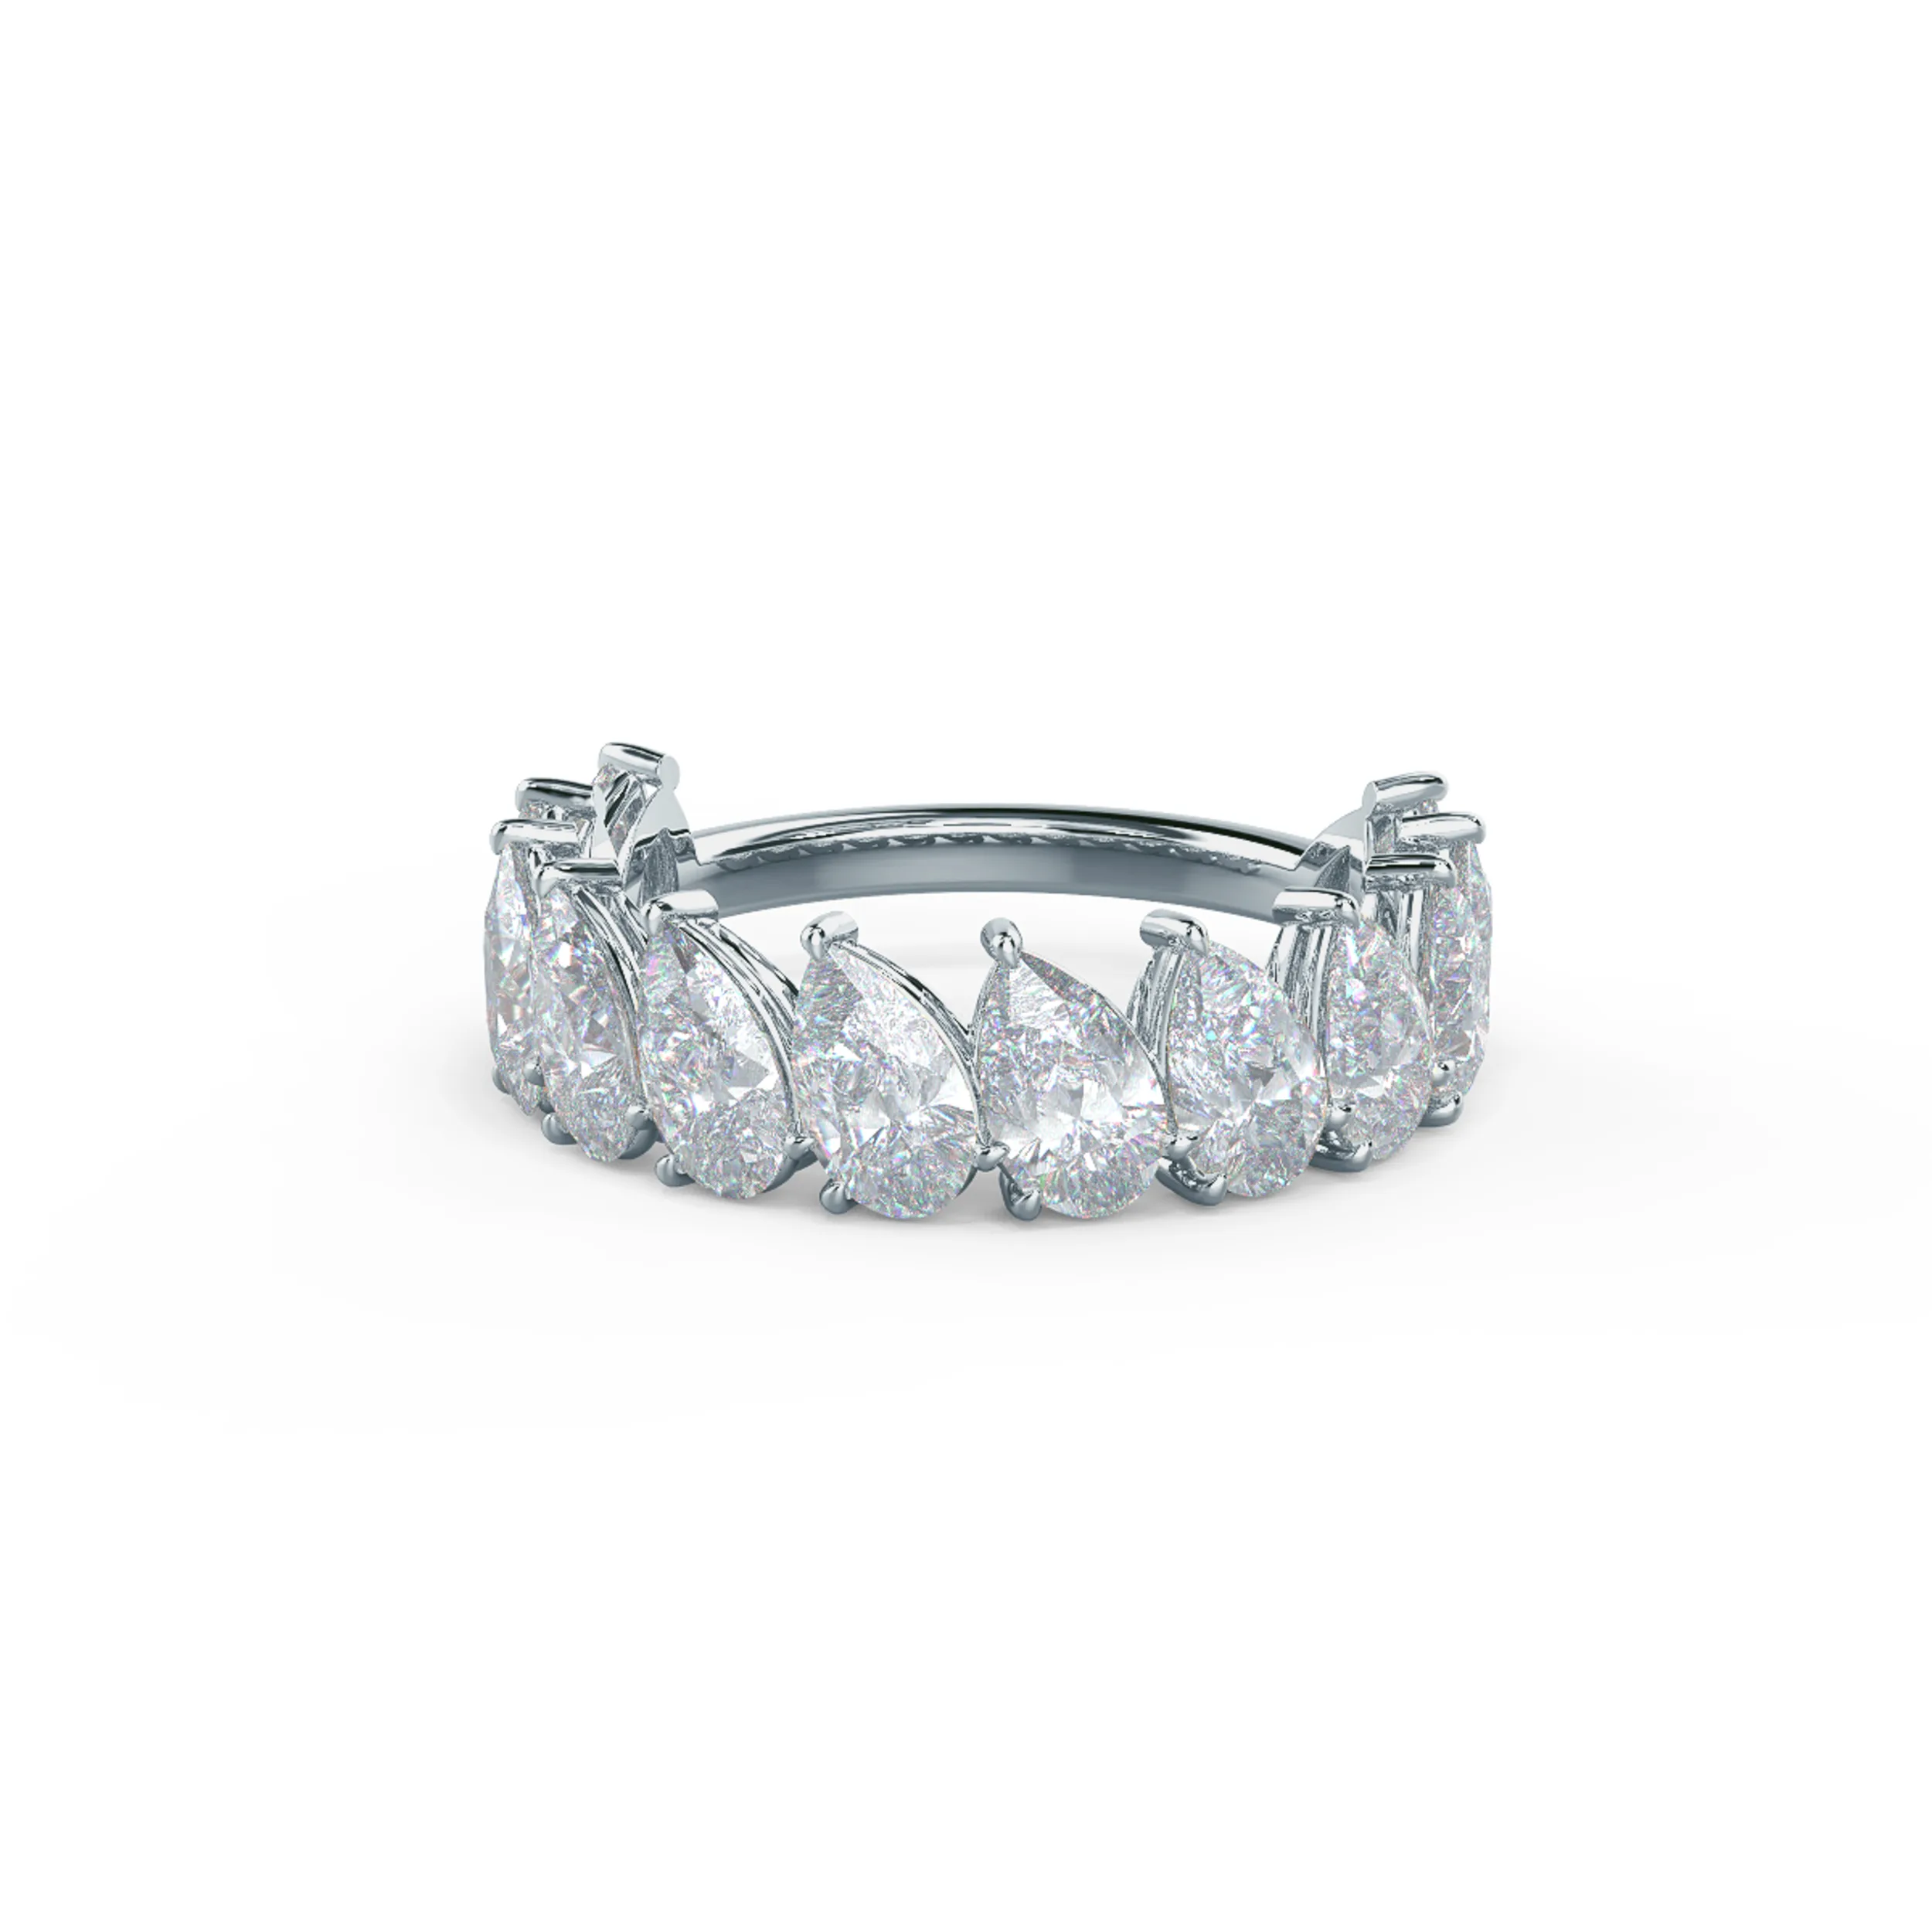 18k White Gold Pear Angled Three Quarter Band featuring 4.0 Carat Man Made Diamonds (Main View)